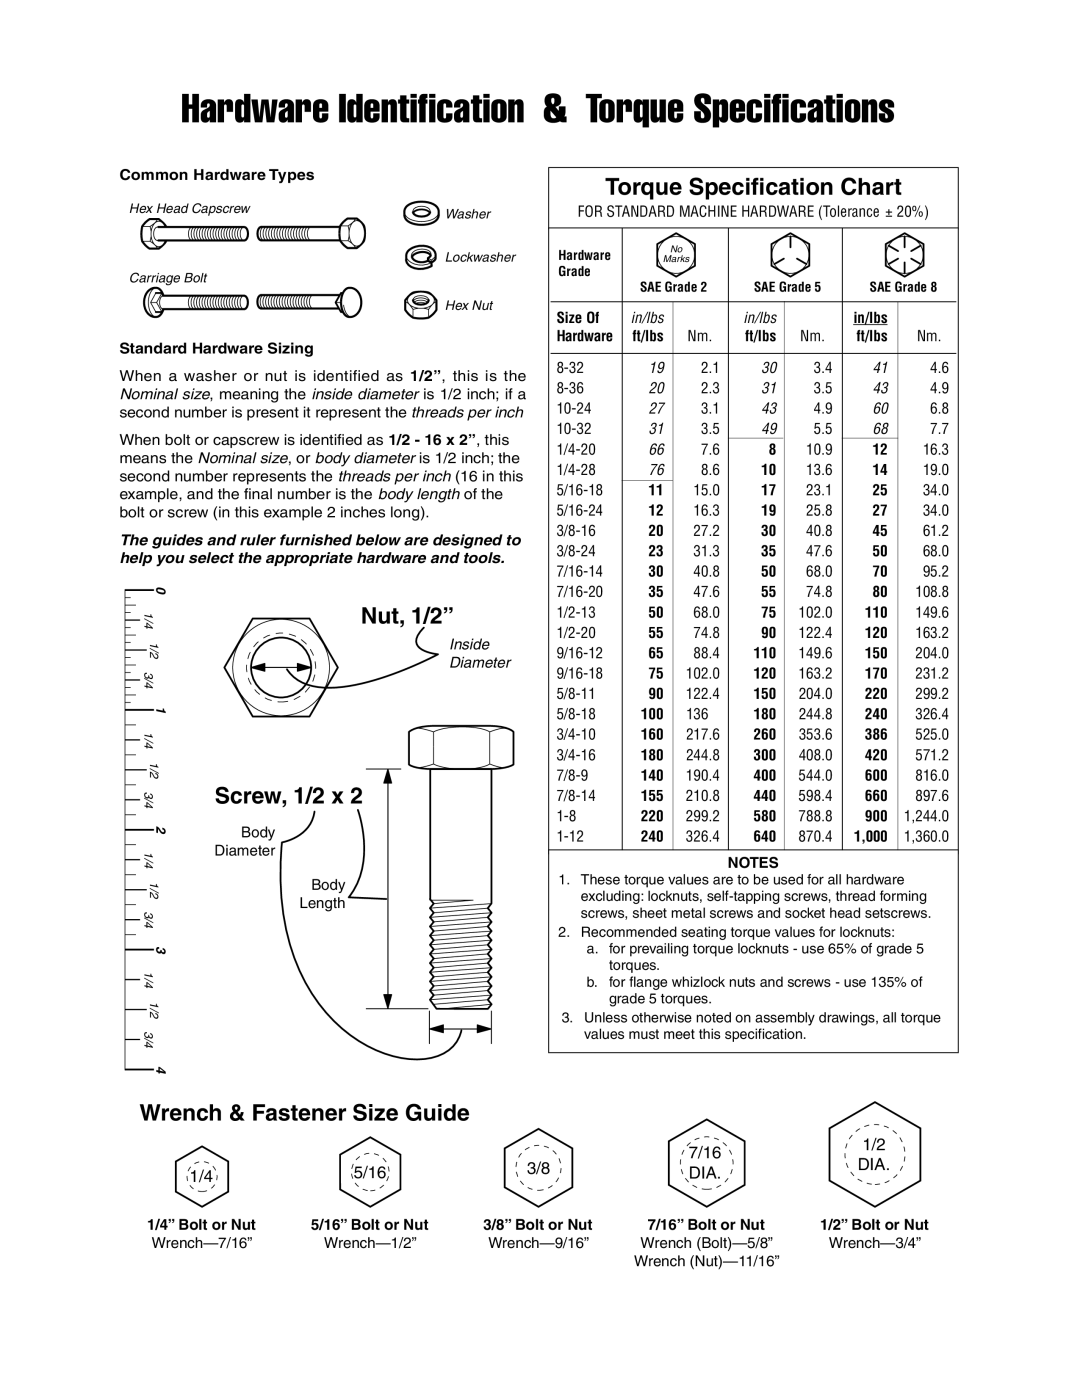 Snapper 4567 Wrench & Fastener Size Guide, Hardware Identification & Torque Specifications, Torque Specification Chart 